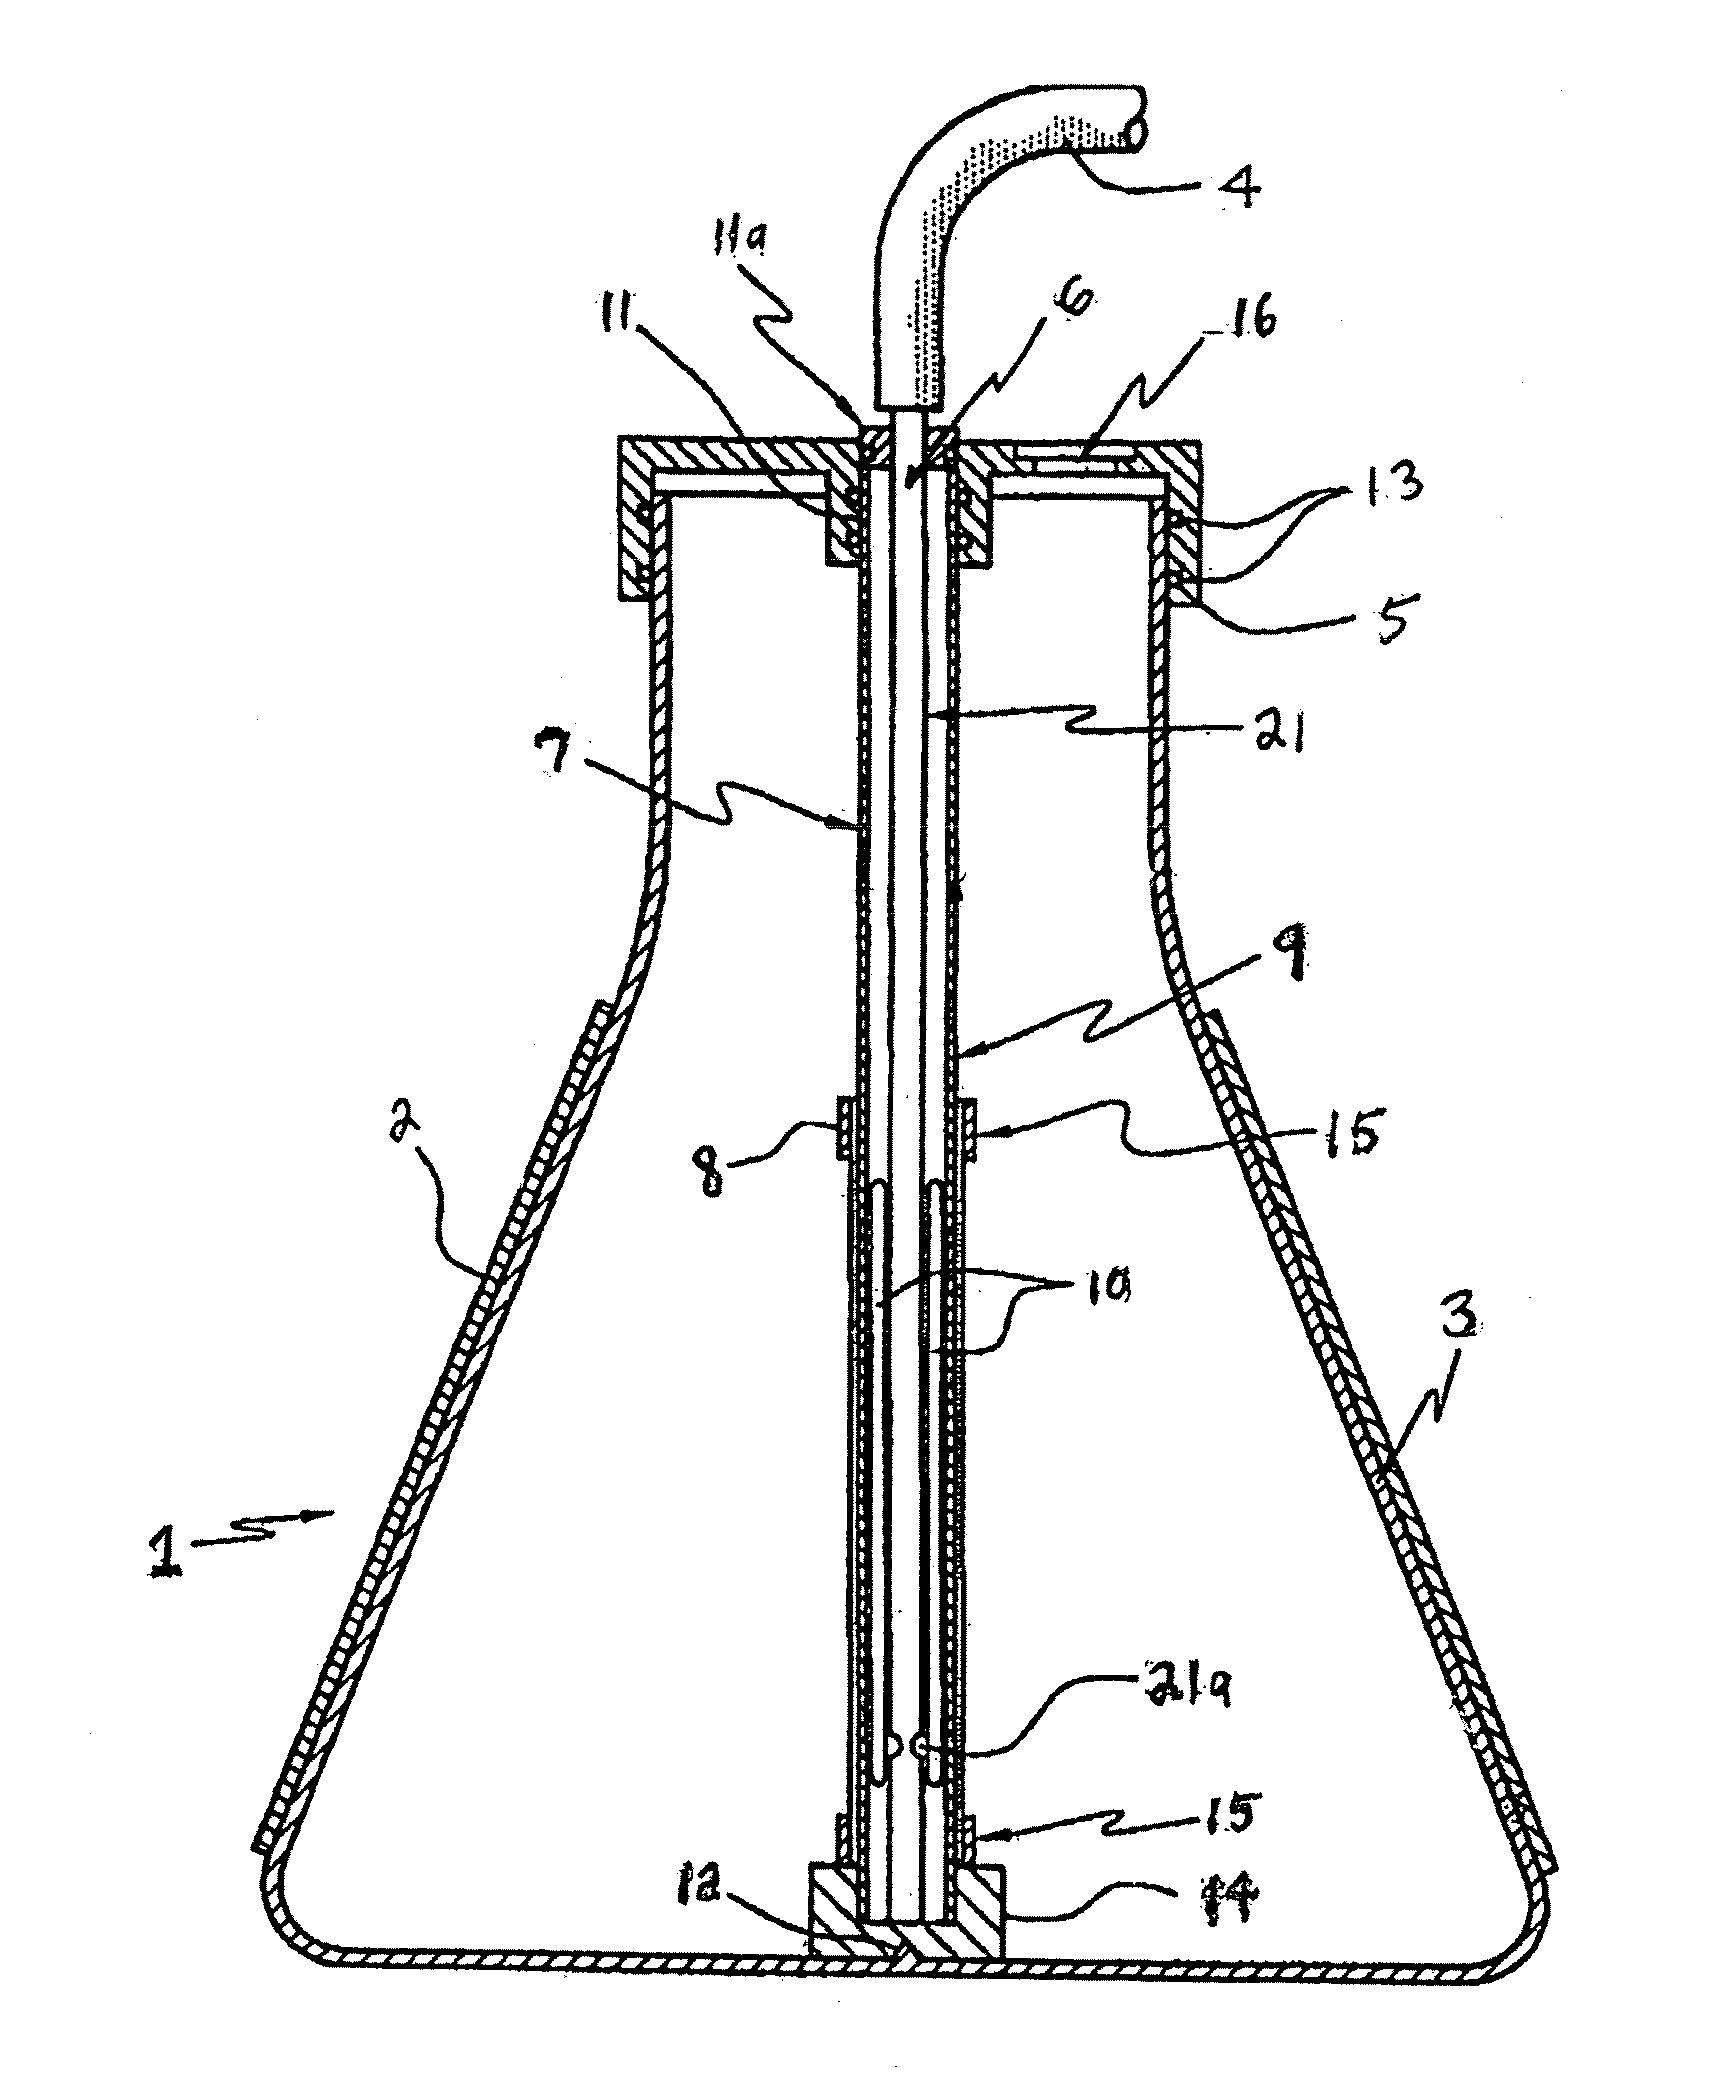 Apparatus for Demineralizing Osteoinductive Bone